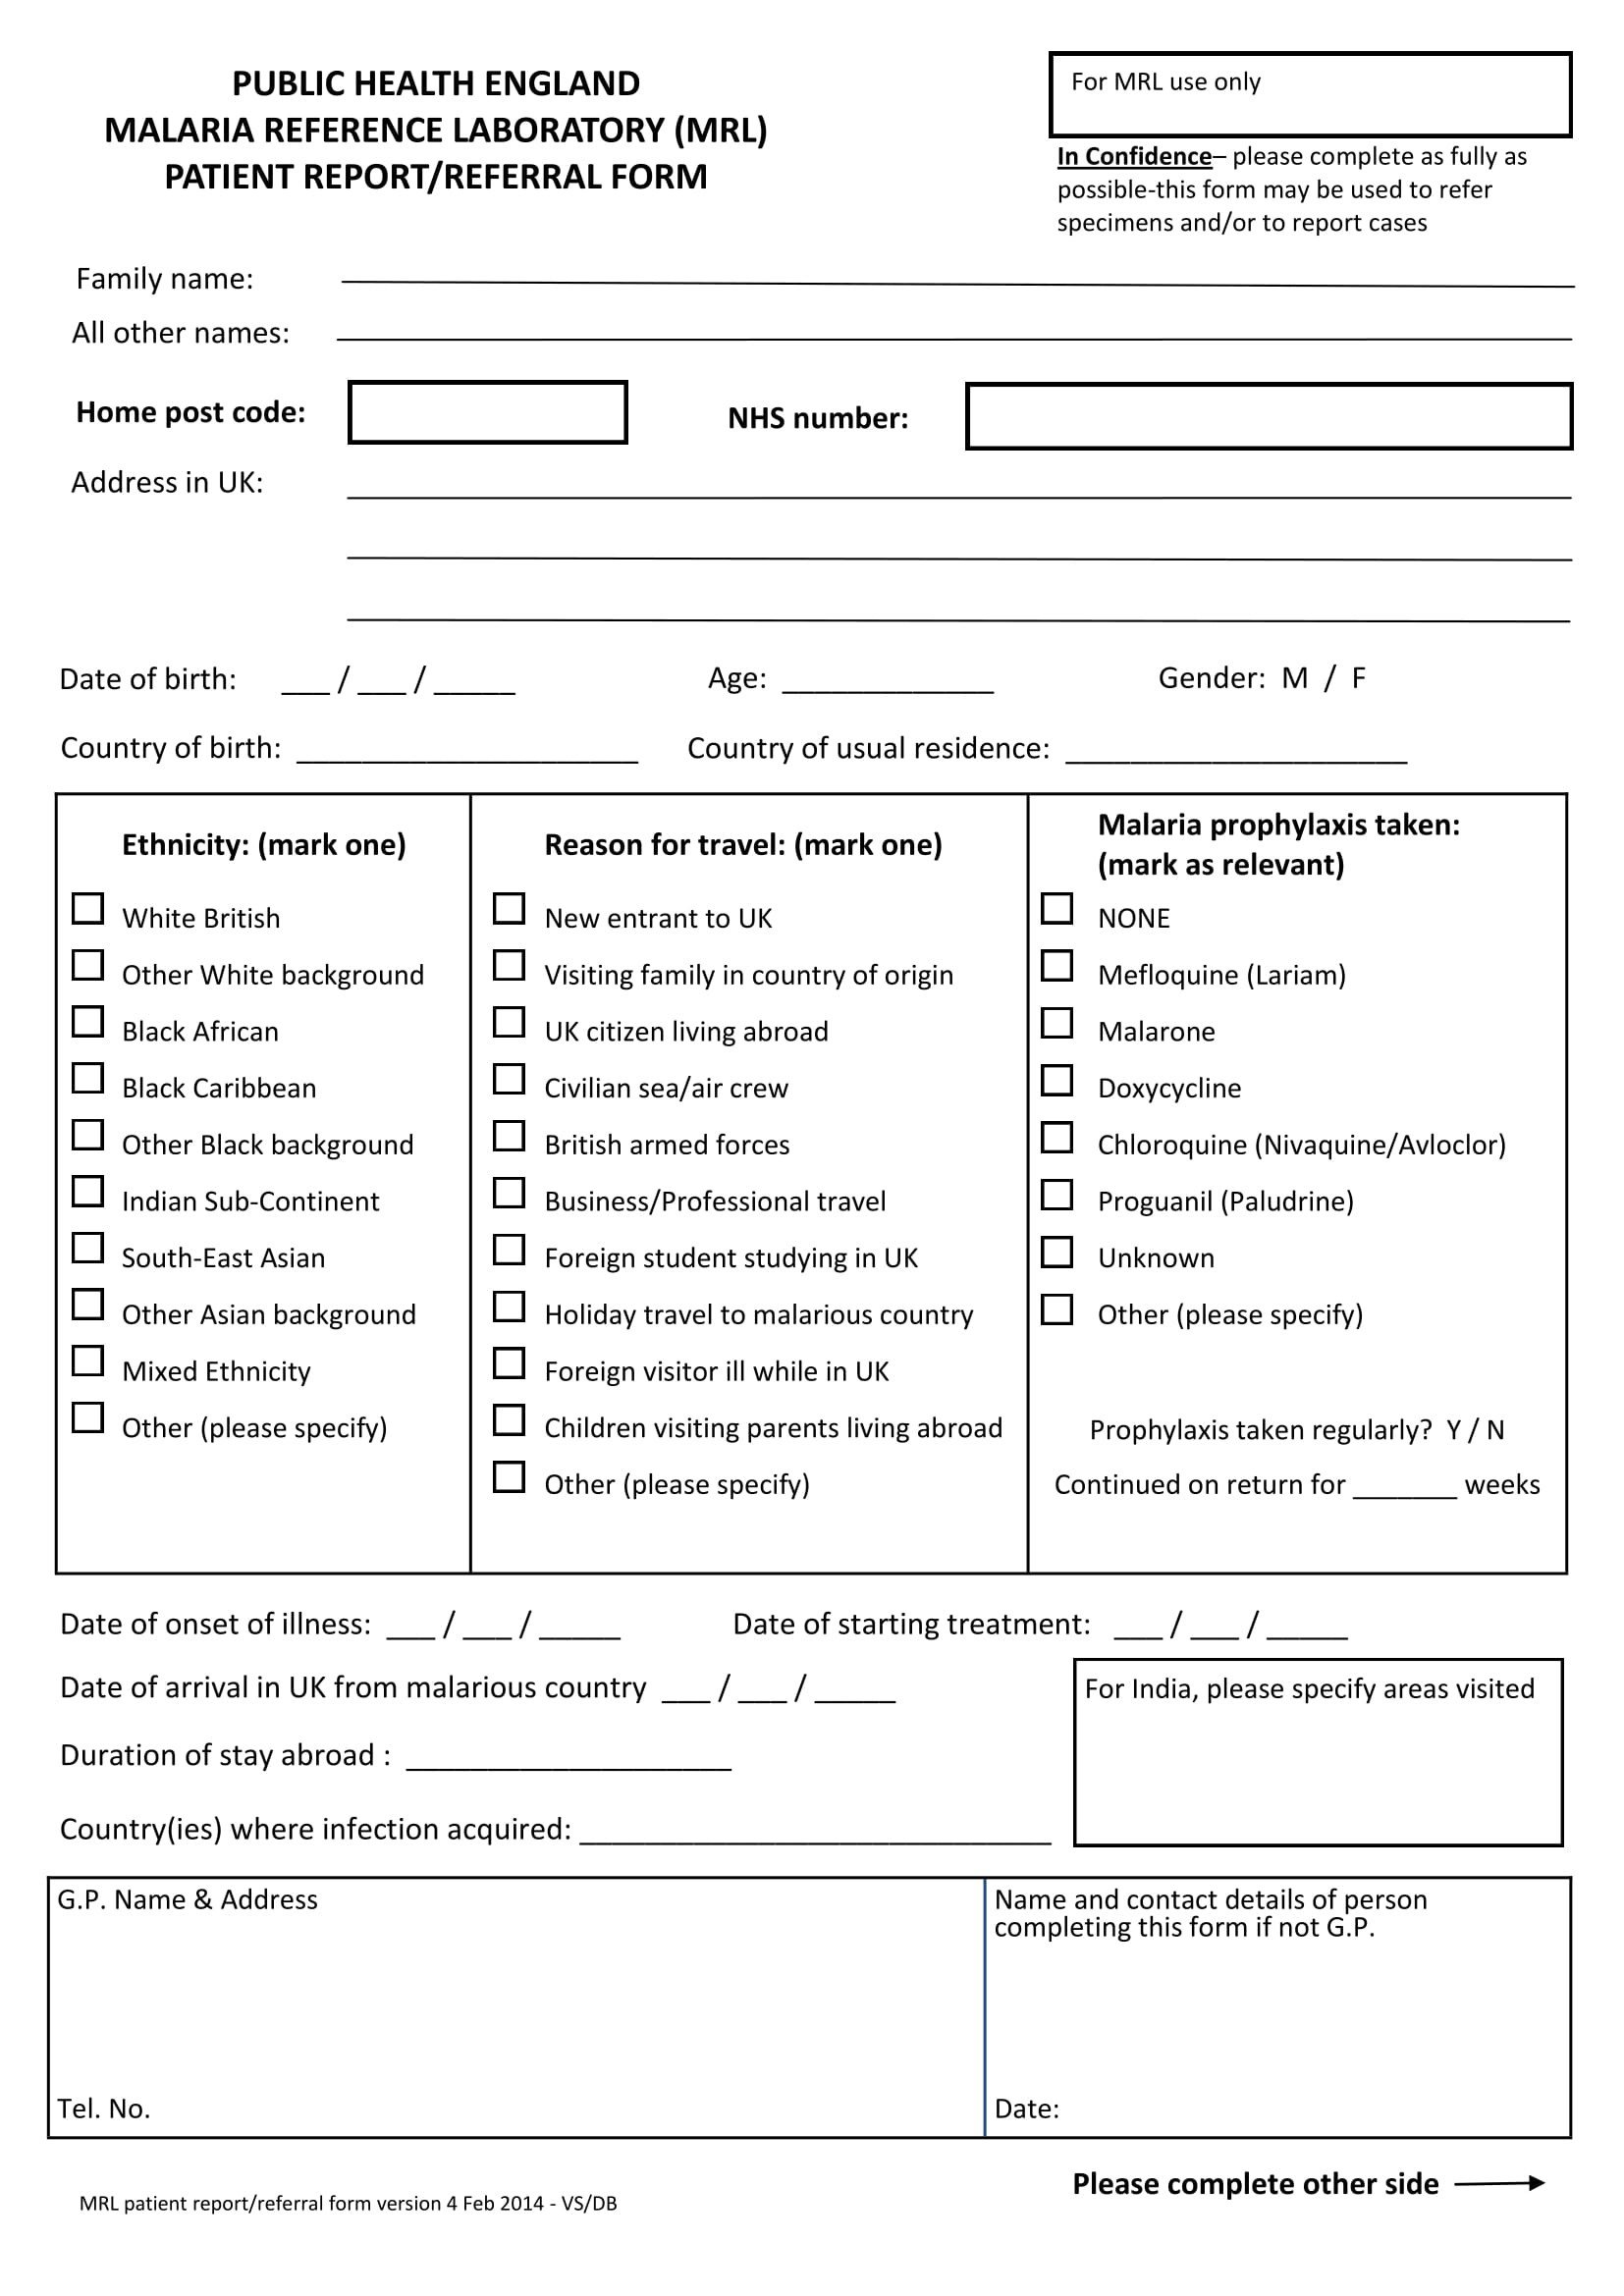 Prehospital Care Report Template 14 Patient Report forms Free Word Pdf format Download